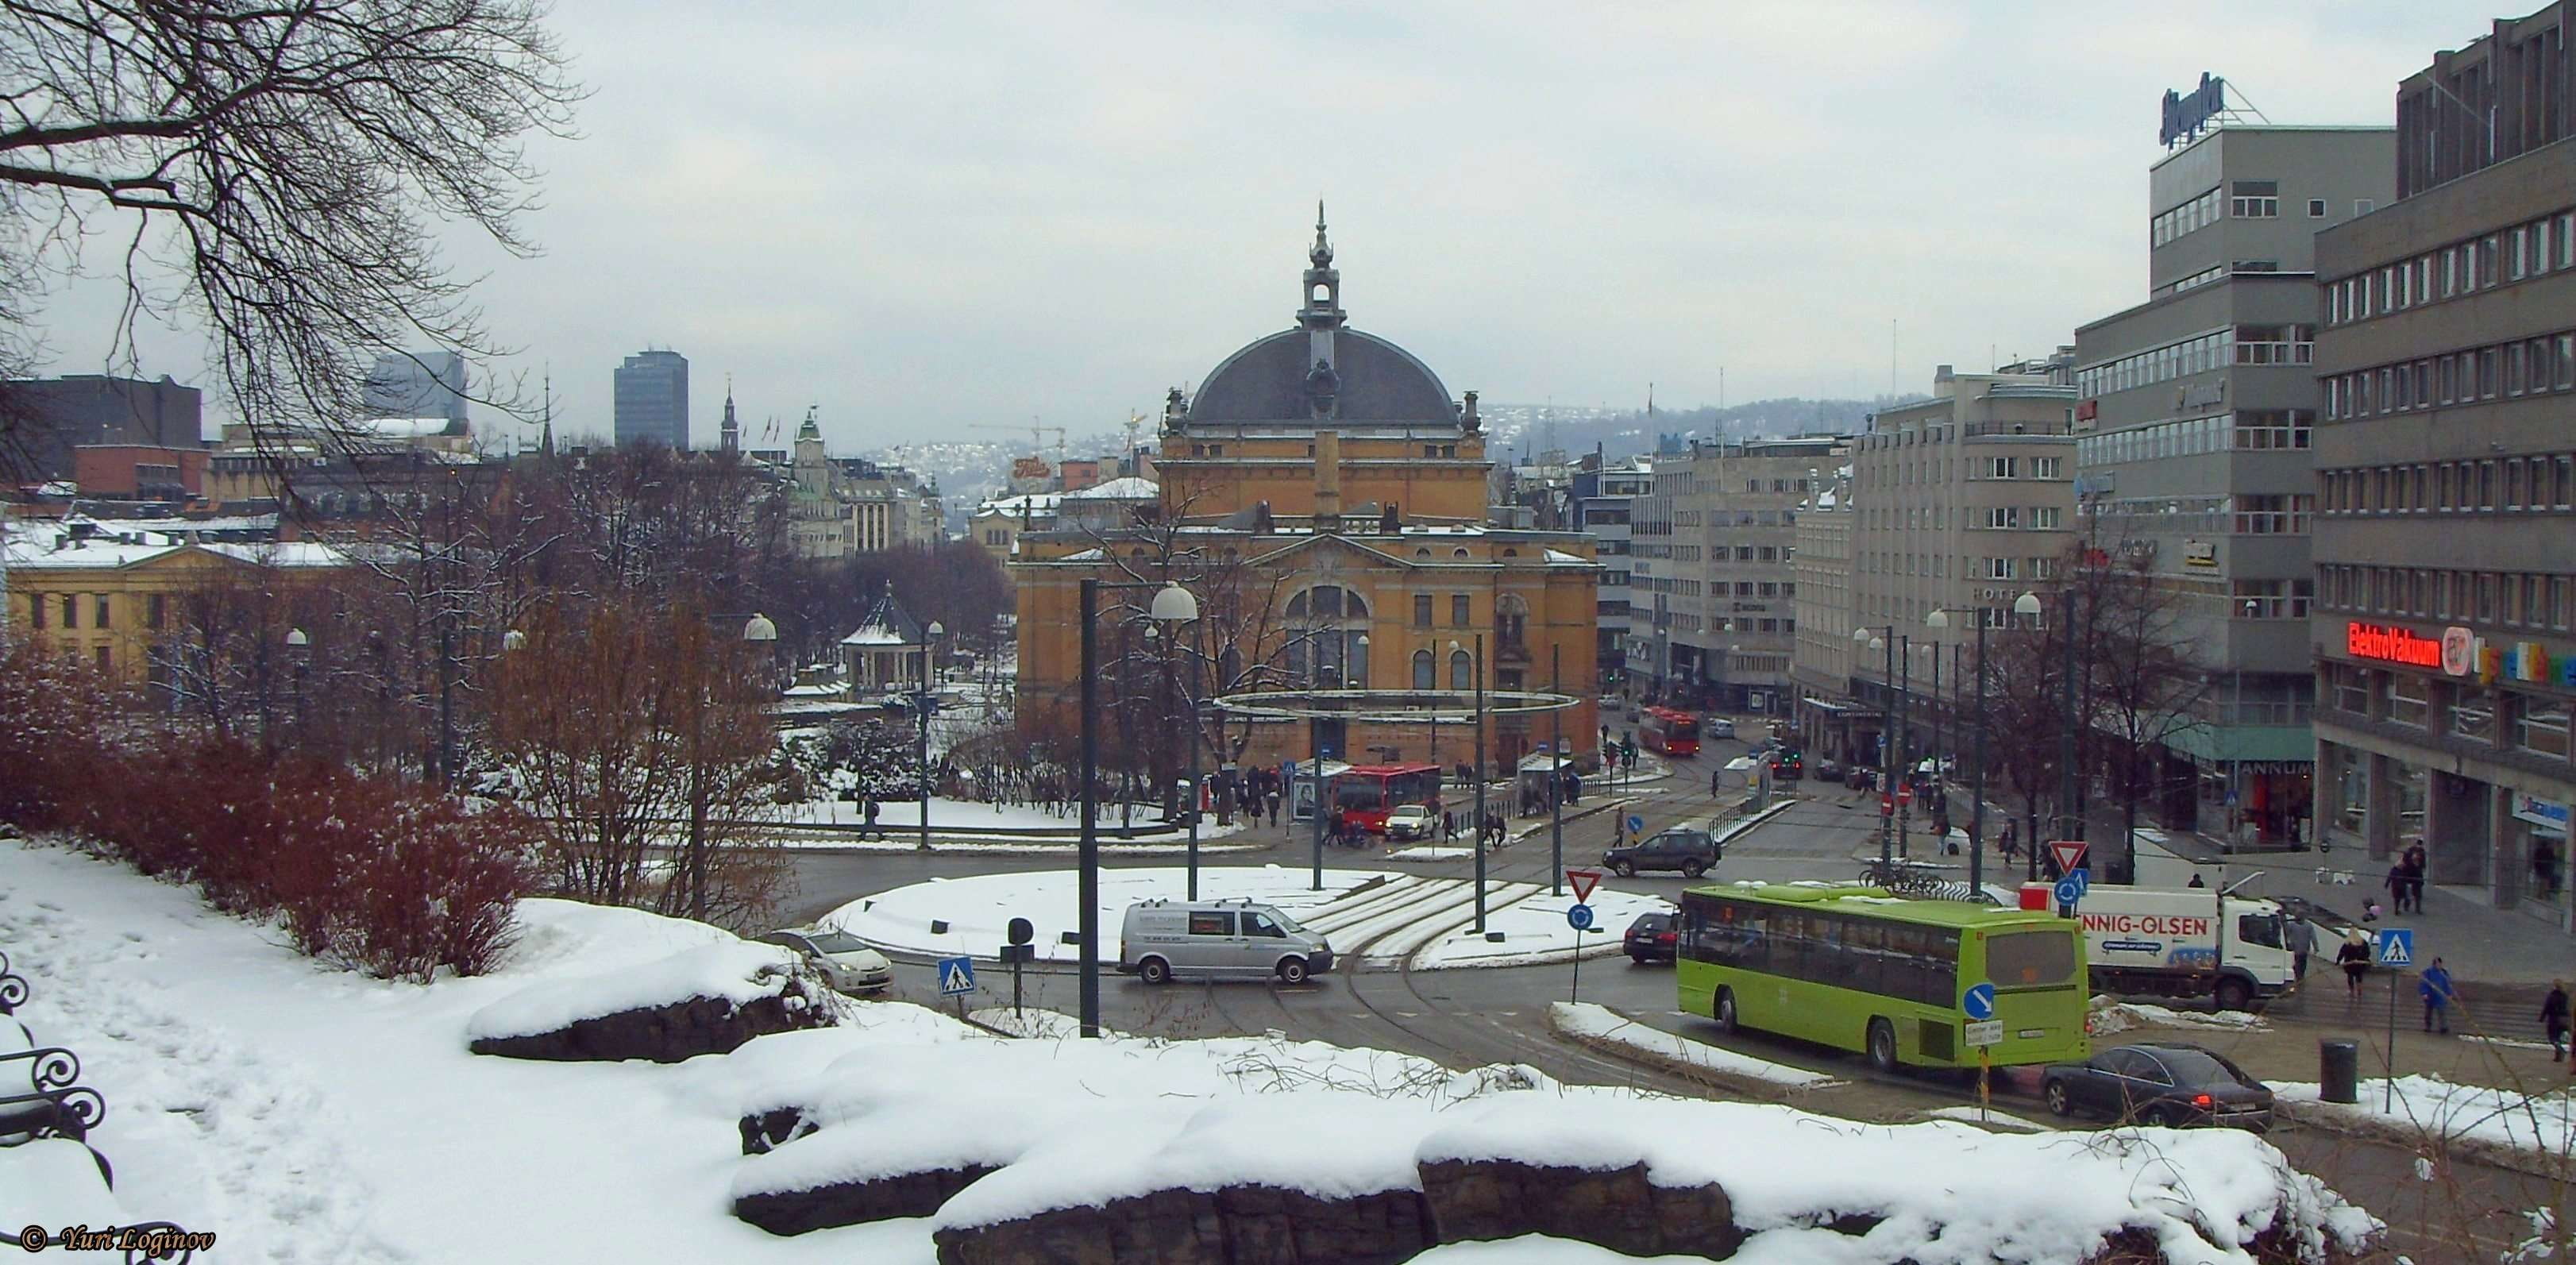 national theatre, nationaltheatret, norge, norway, oslo, snow